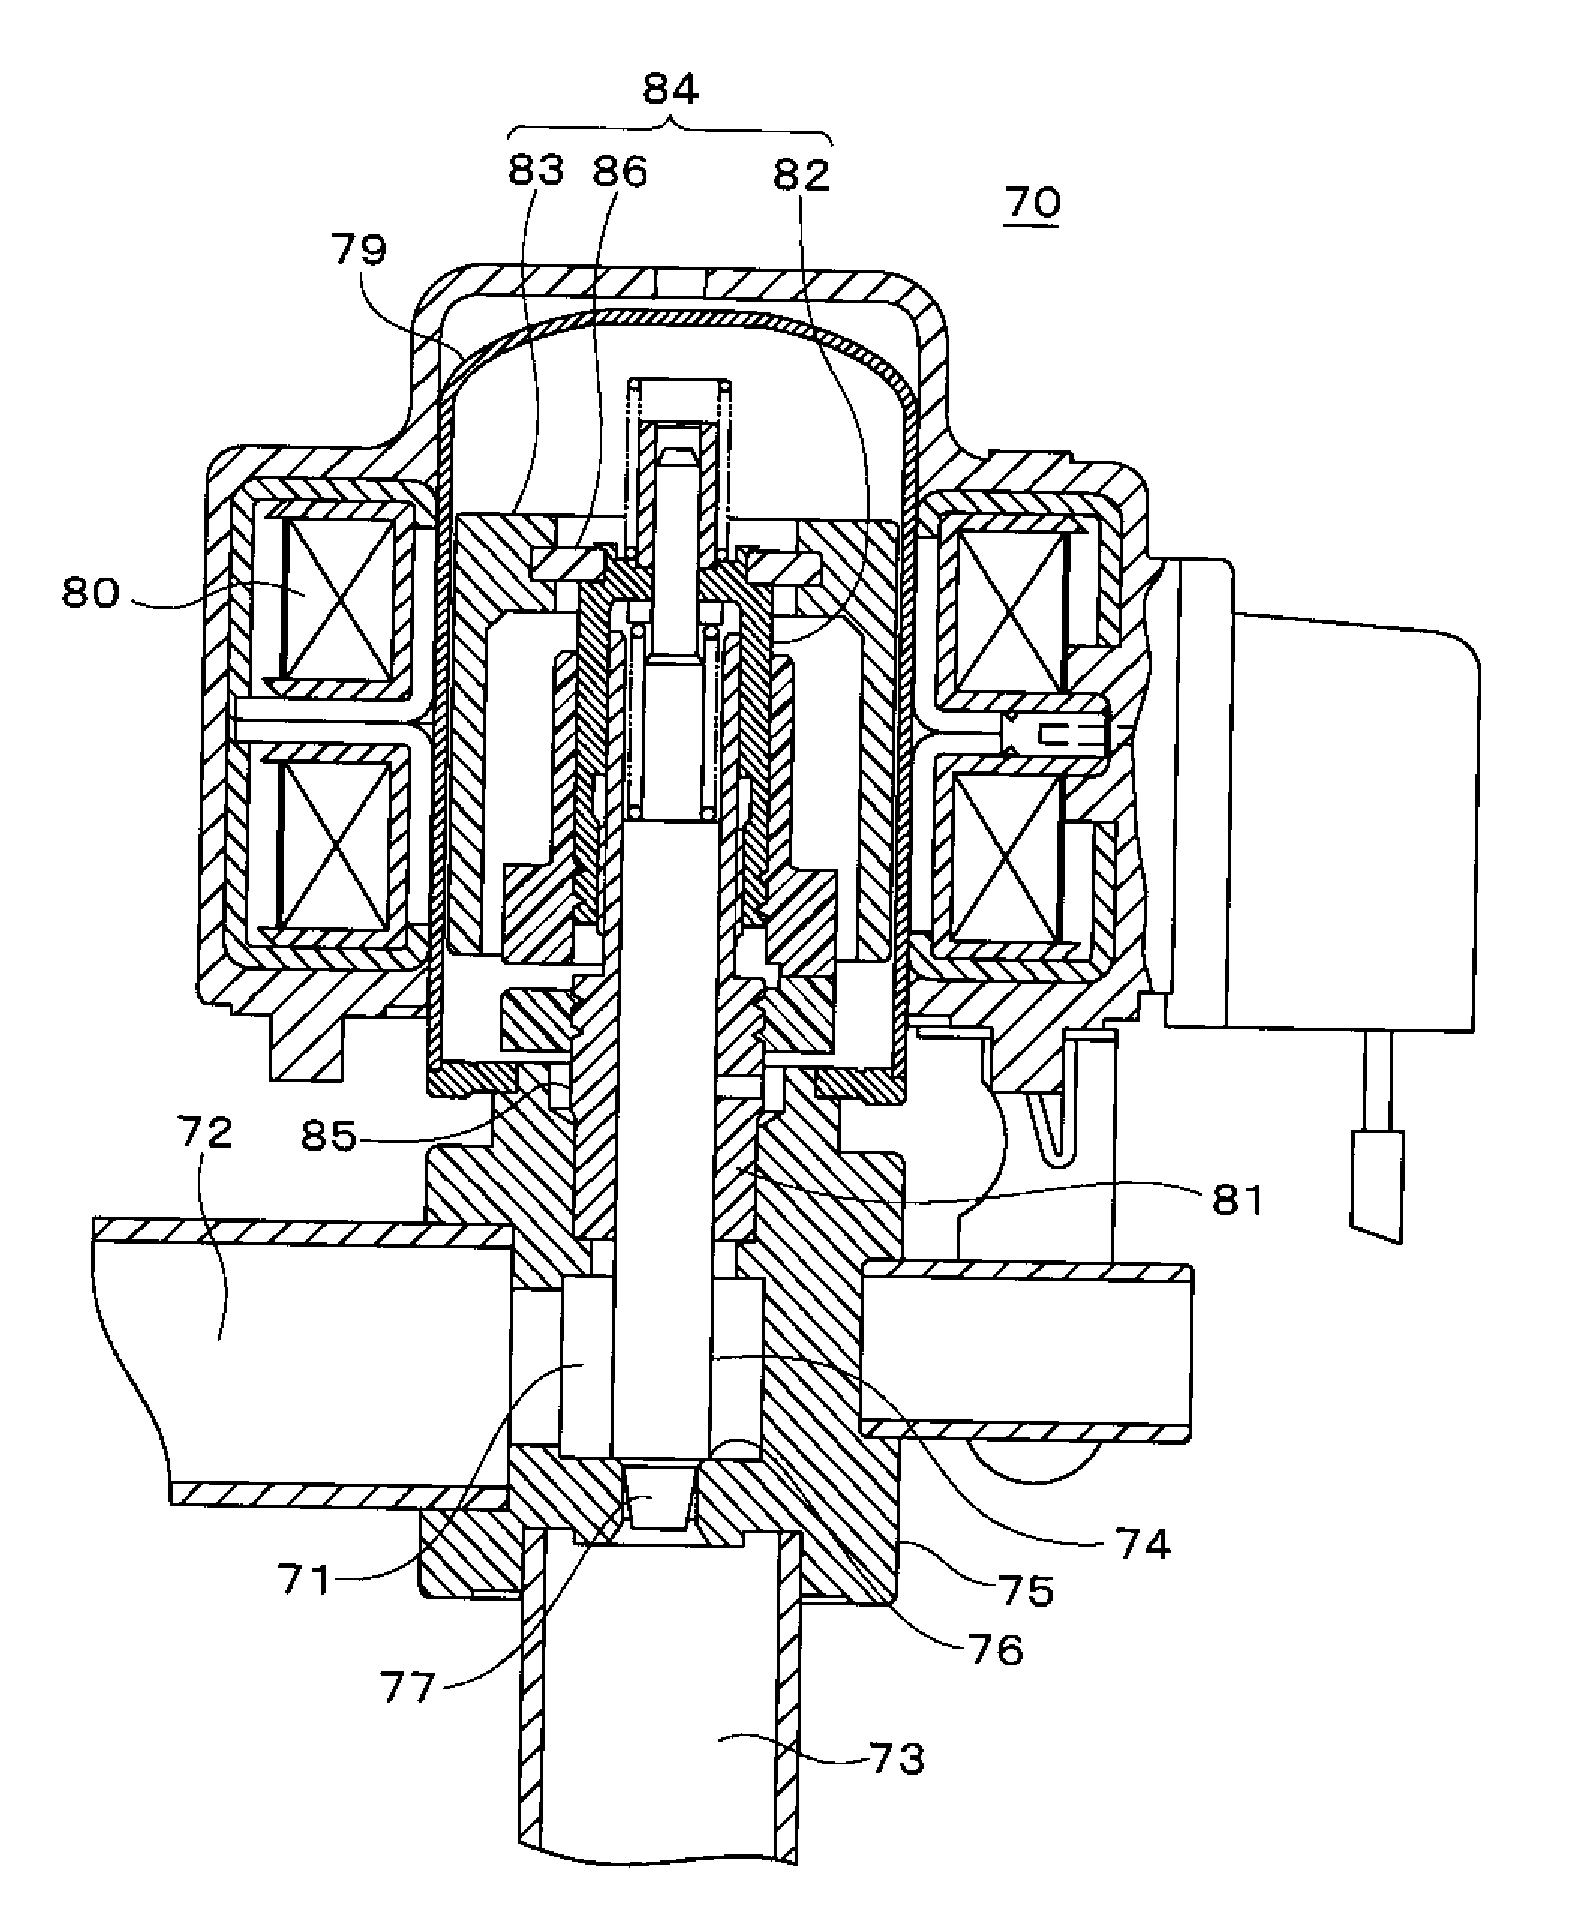 Motor driven valve and cooling/heating system